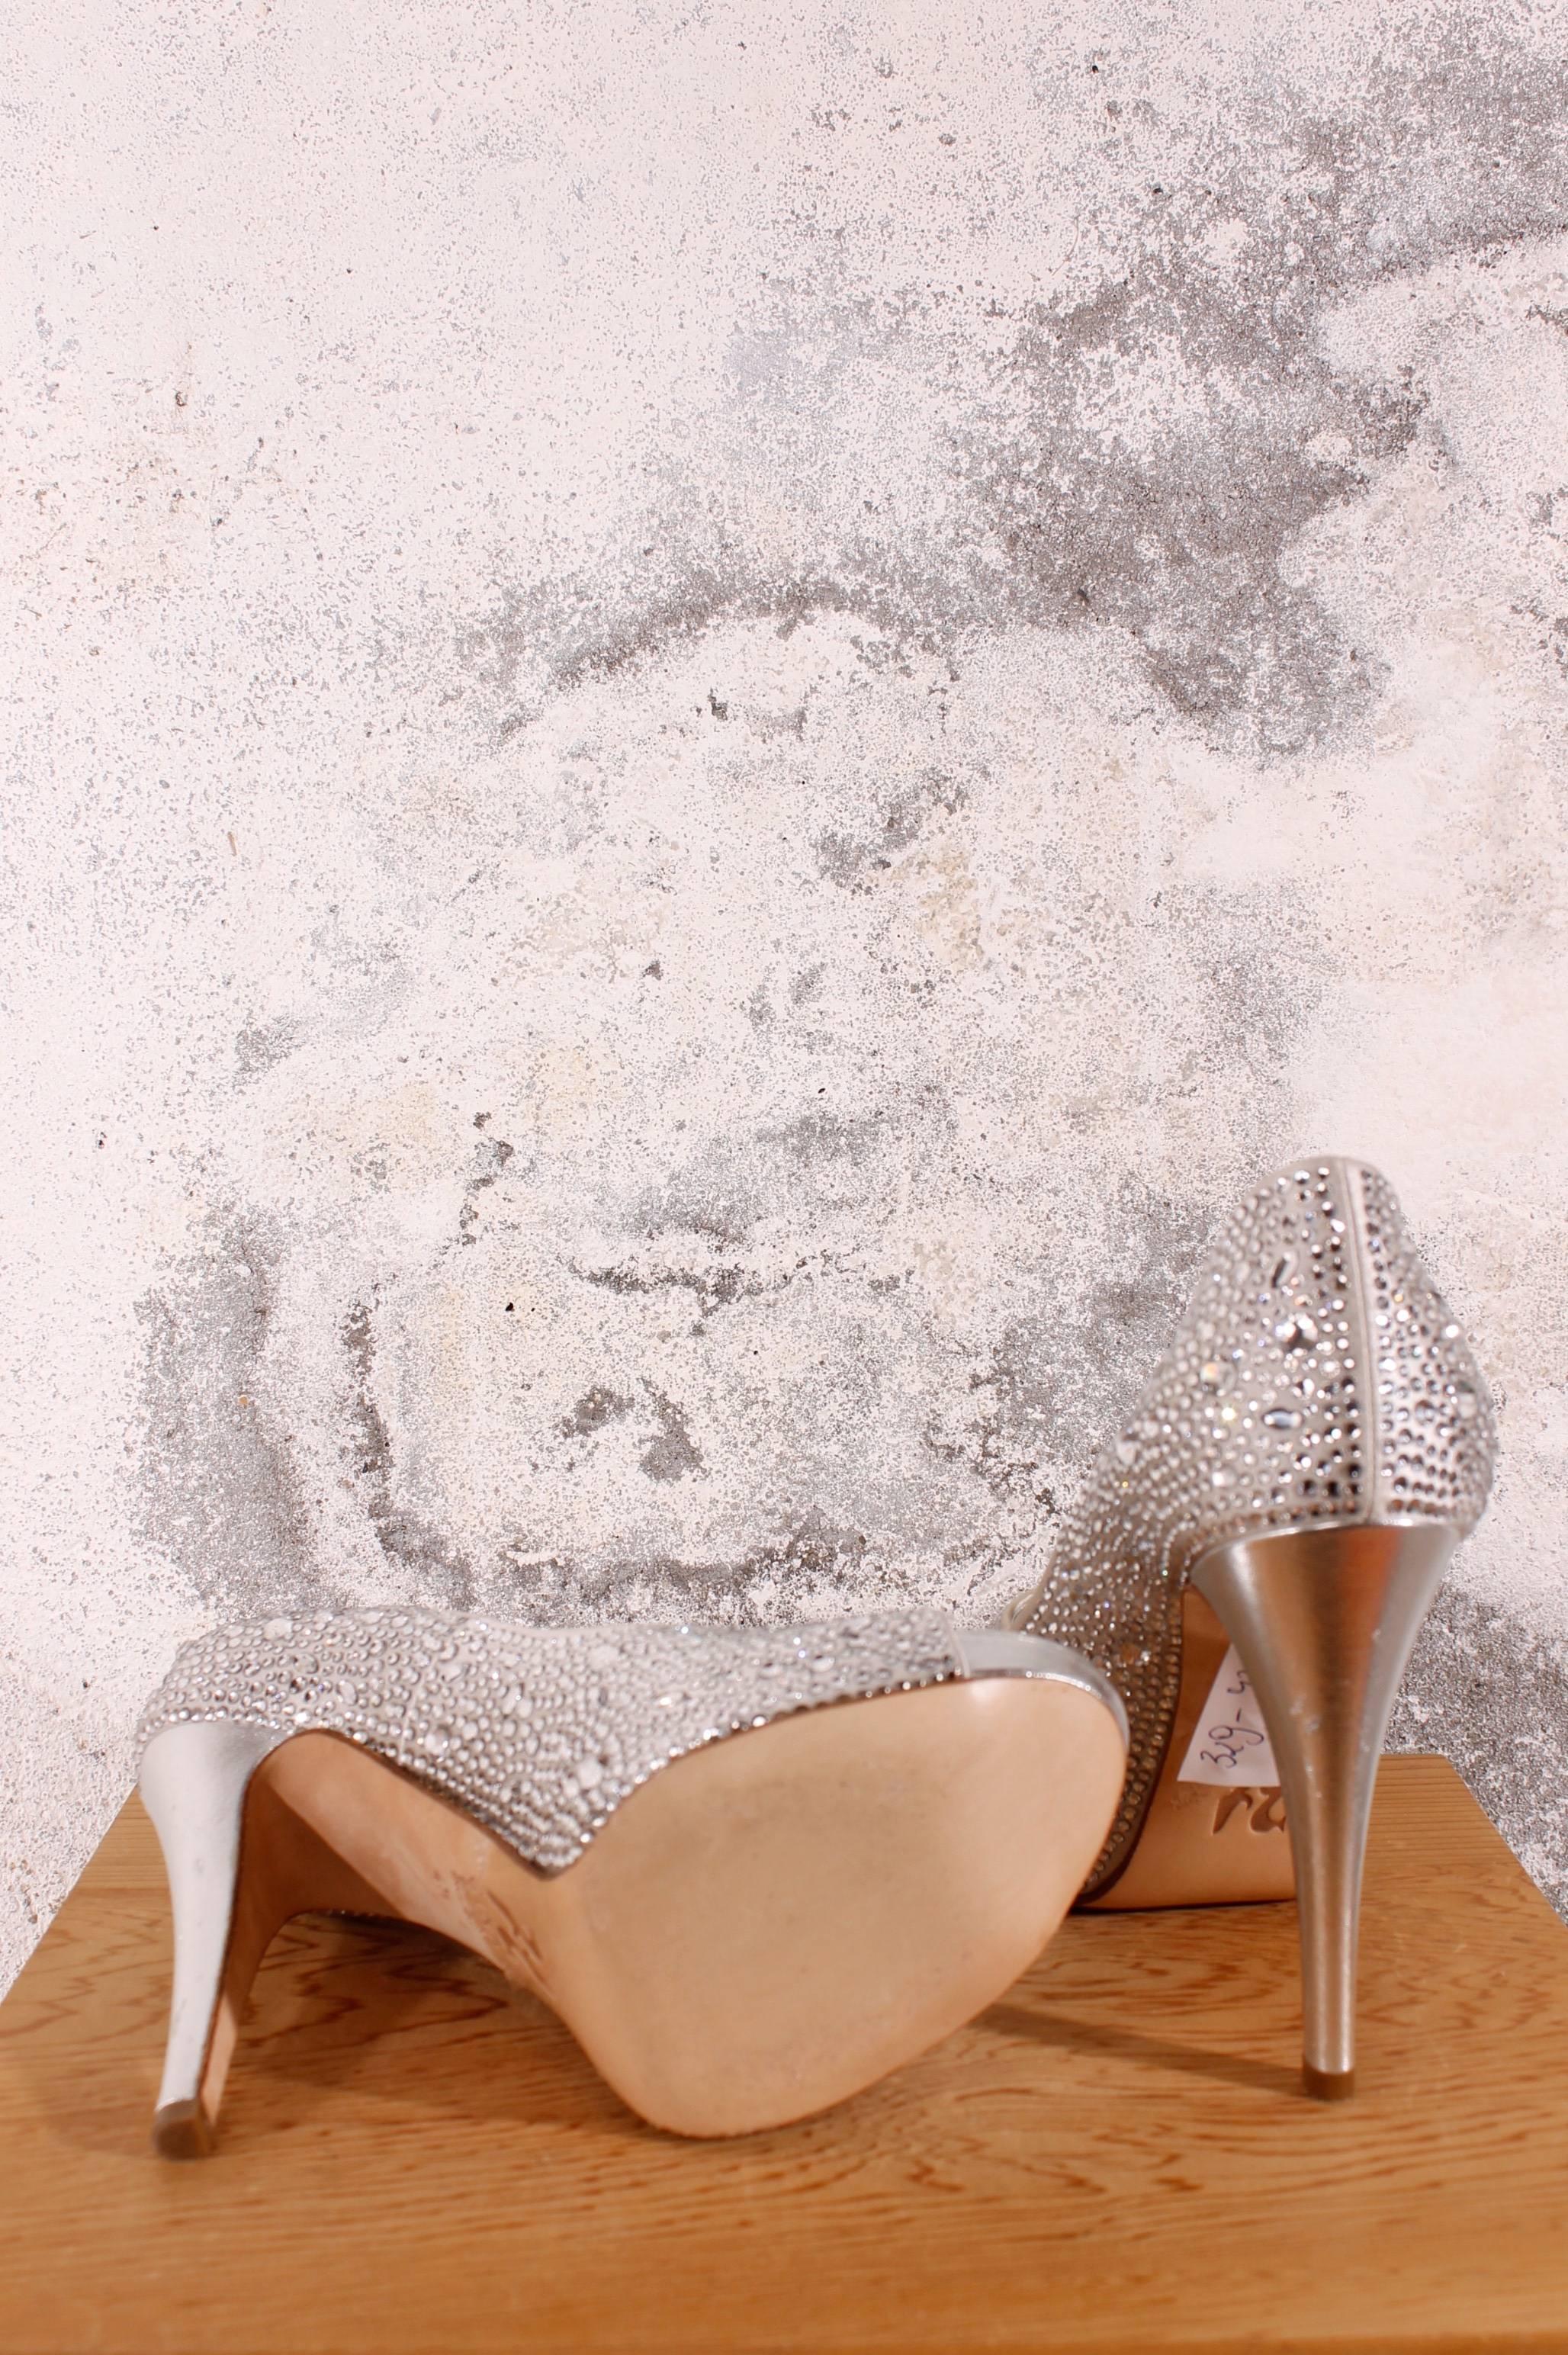 Gina Pumps find their origin in England, beautiful!

This shiny pair has white coloured crystals in different sizes and shapes all over the shoe. The base is made of silver coloured satin lined with leather, also in silver.

The heel is alsmost